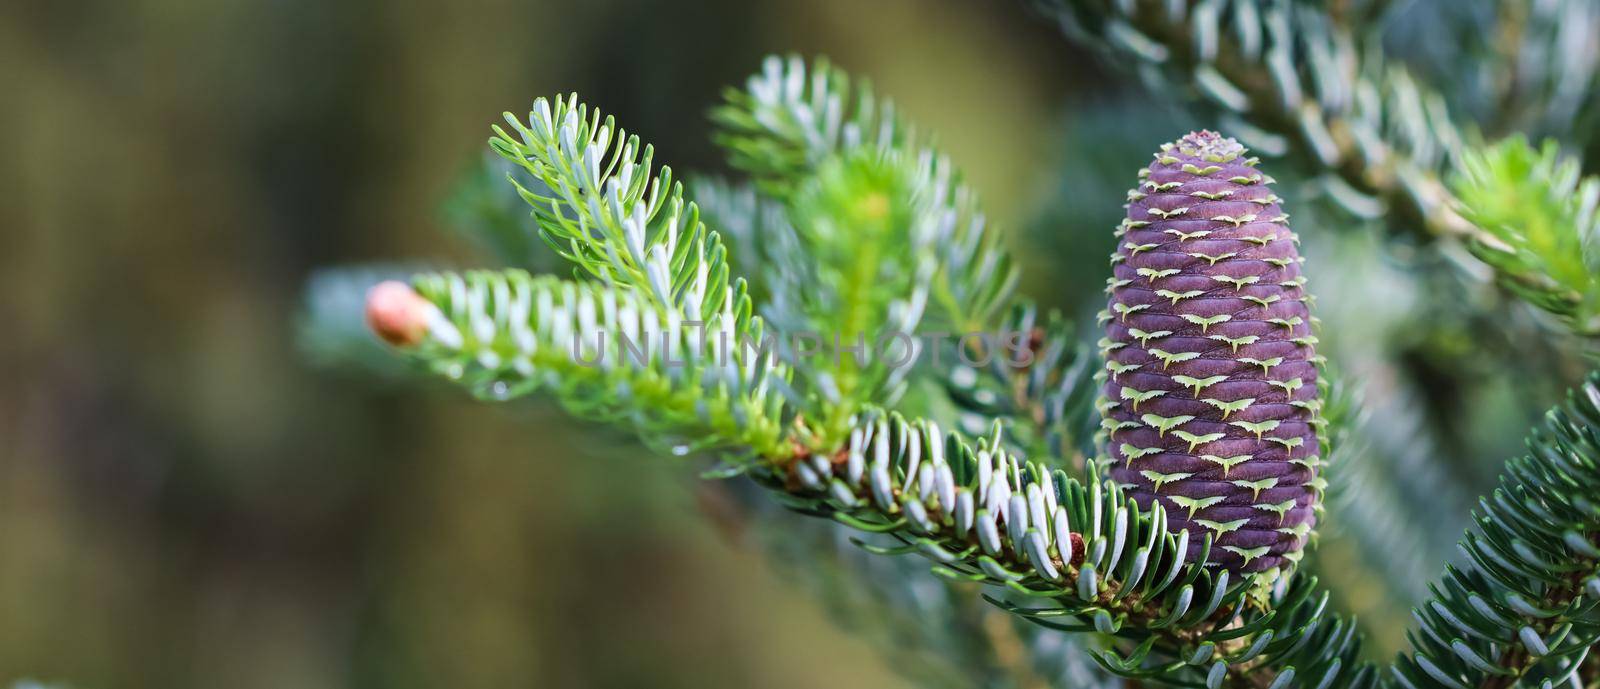 A branch of Korean fir with young cones in spring garden by Olayola